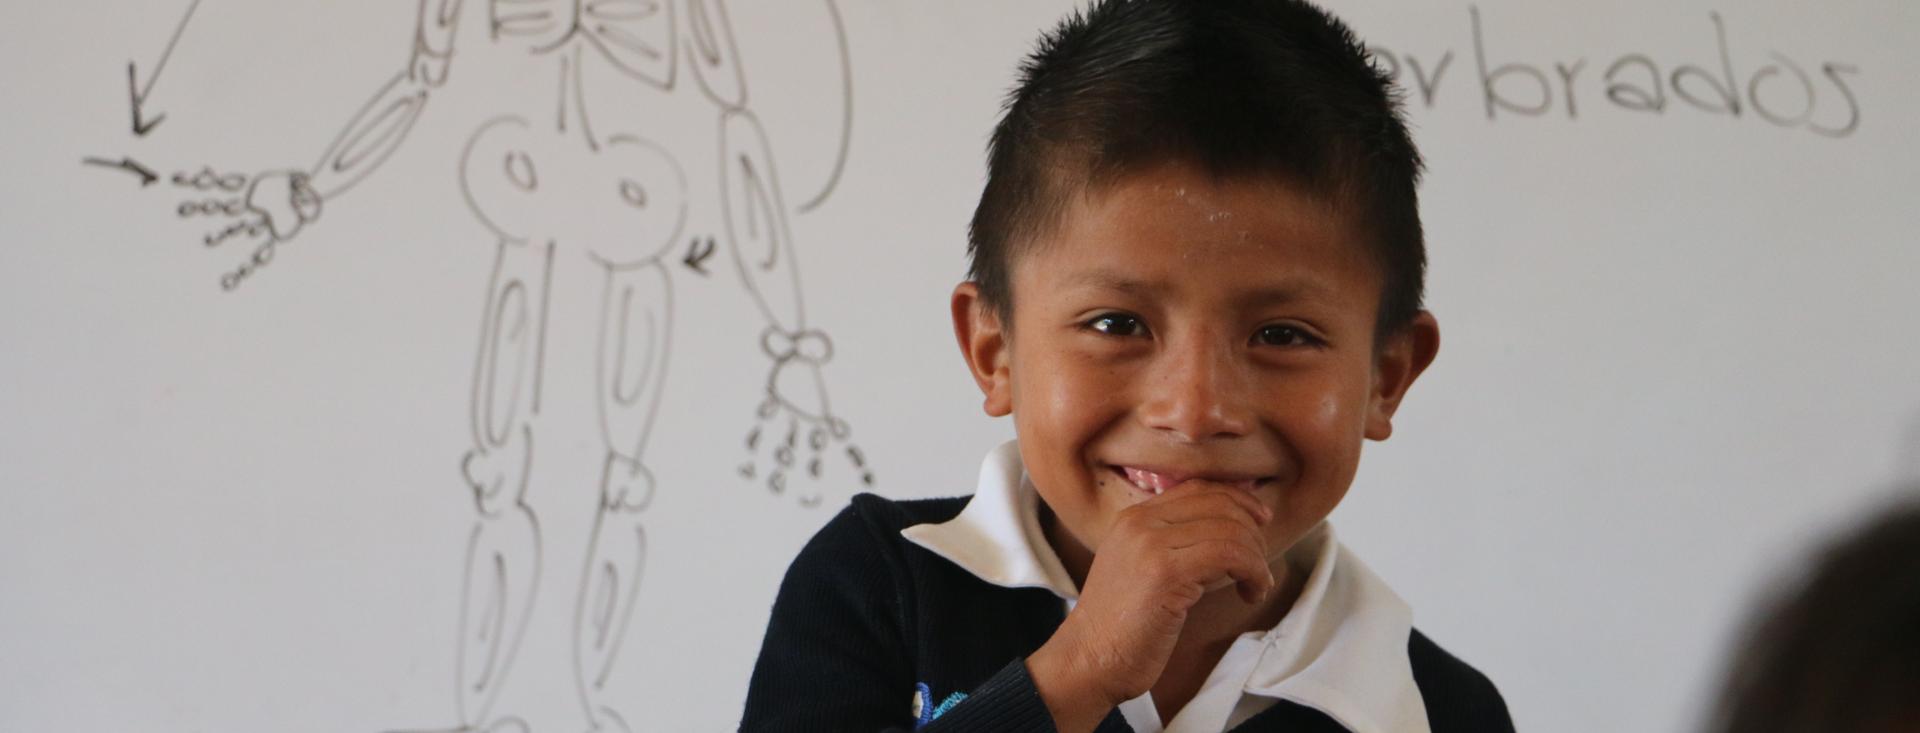 A close up of a young boy smiling broadly in front of a white board with a skeleton drawn on it and a word in Spanish that is partially obsured by the boy's head